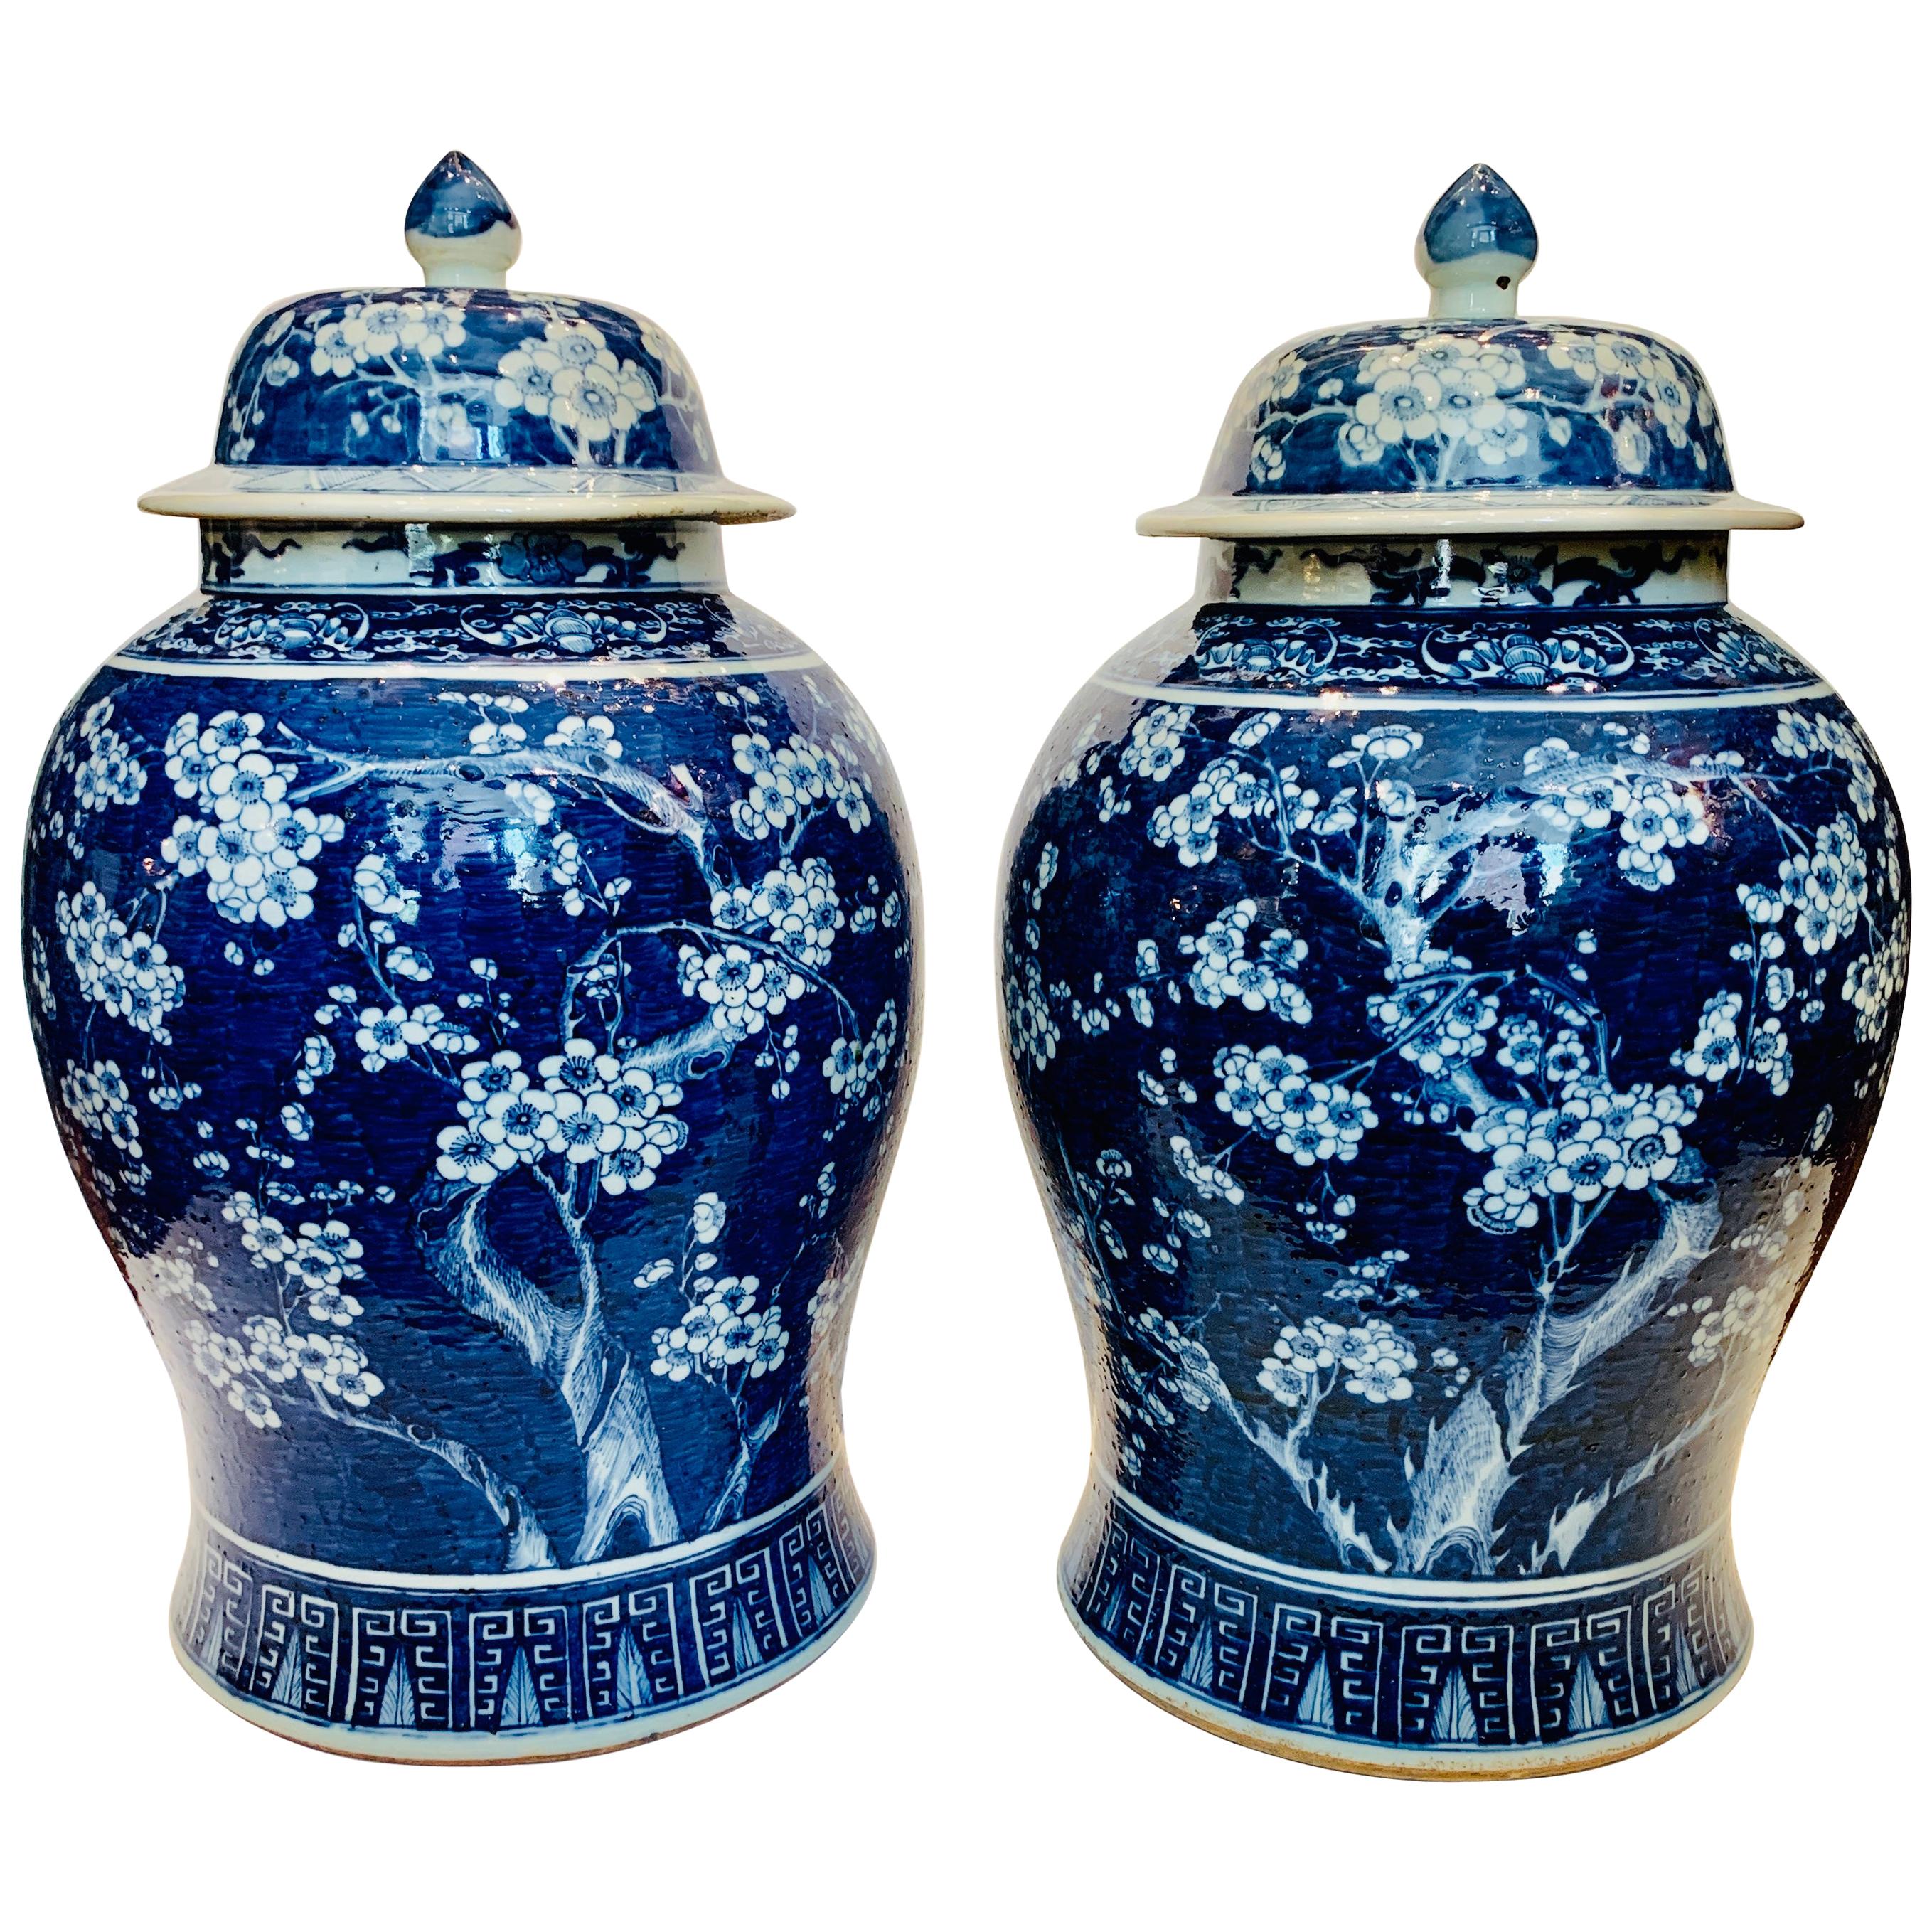 Pair of Large Blue and White Chinese Porcelain Jars Antique Qing Dynasty